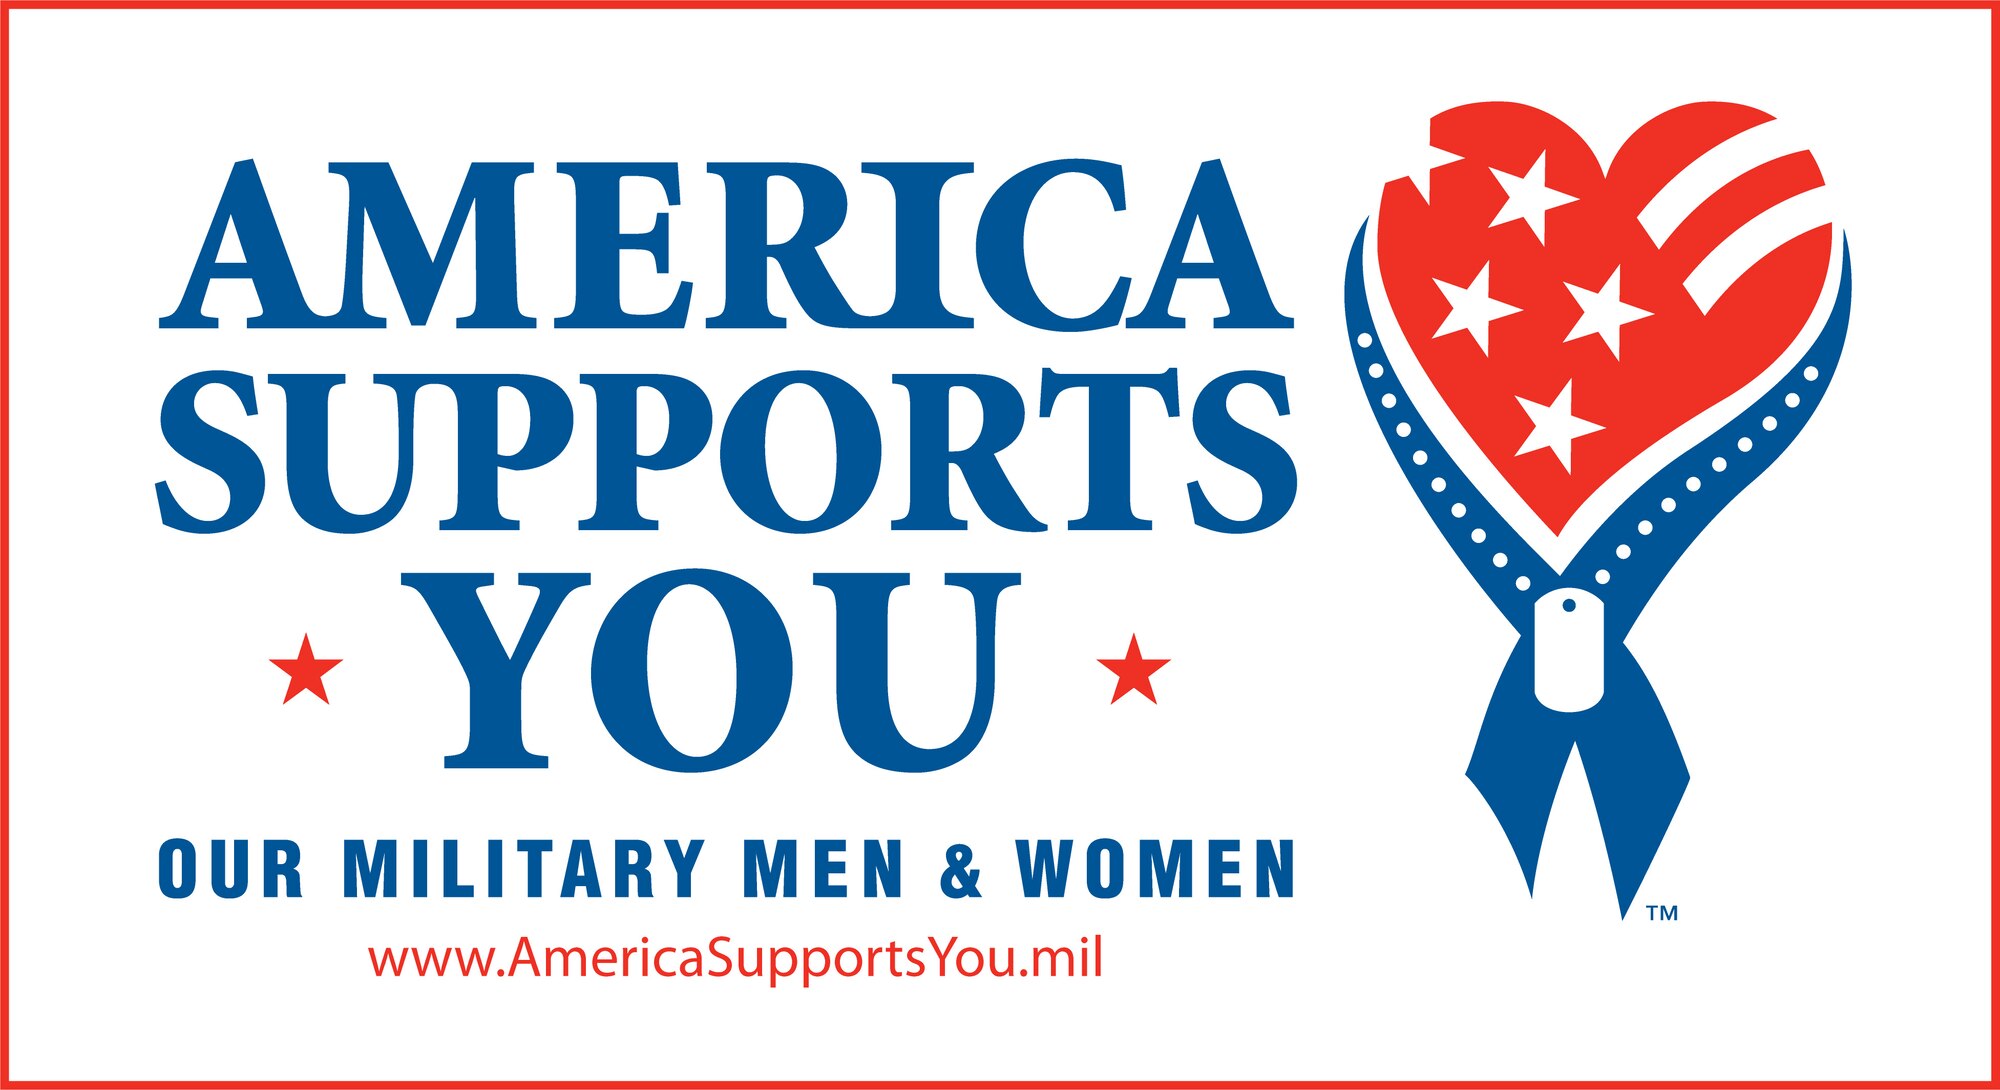 America Supports You is a Defense Department program that provides opportunities for citizens to show support for the U.S. armed forces. Launched in 2004, the program highlights citizen support for the troops and communicates that support to the members of our armed forces at home and abroad.  (DOD illustration)